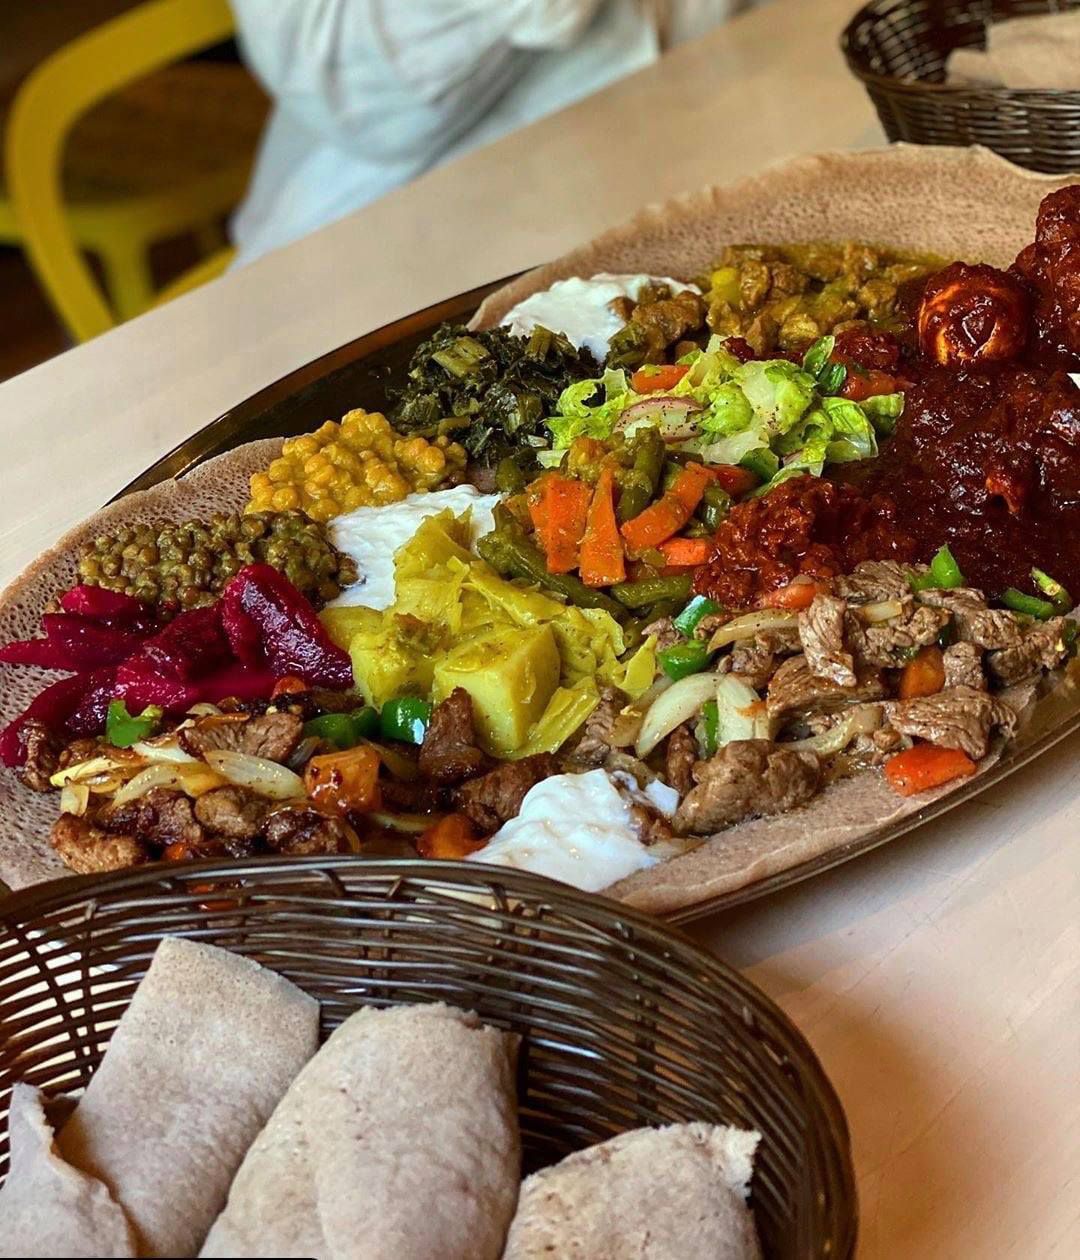 A colorful plate of Ethiopian dishes with a side basket of rolled injera bread